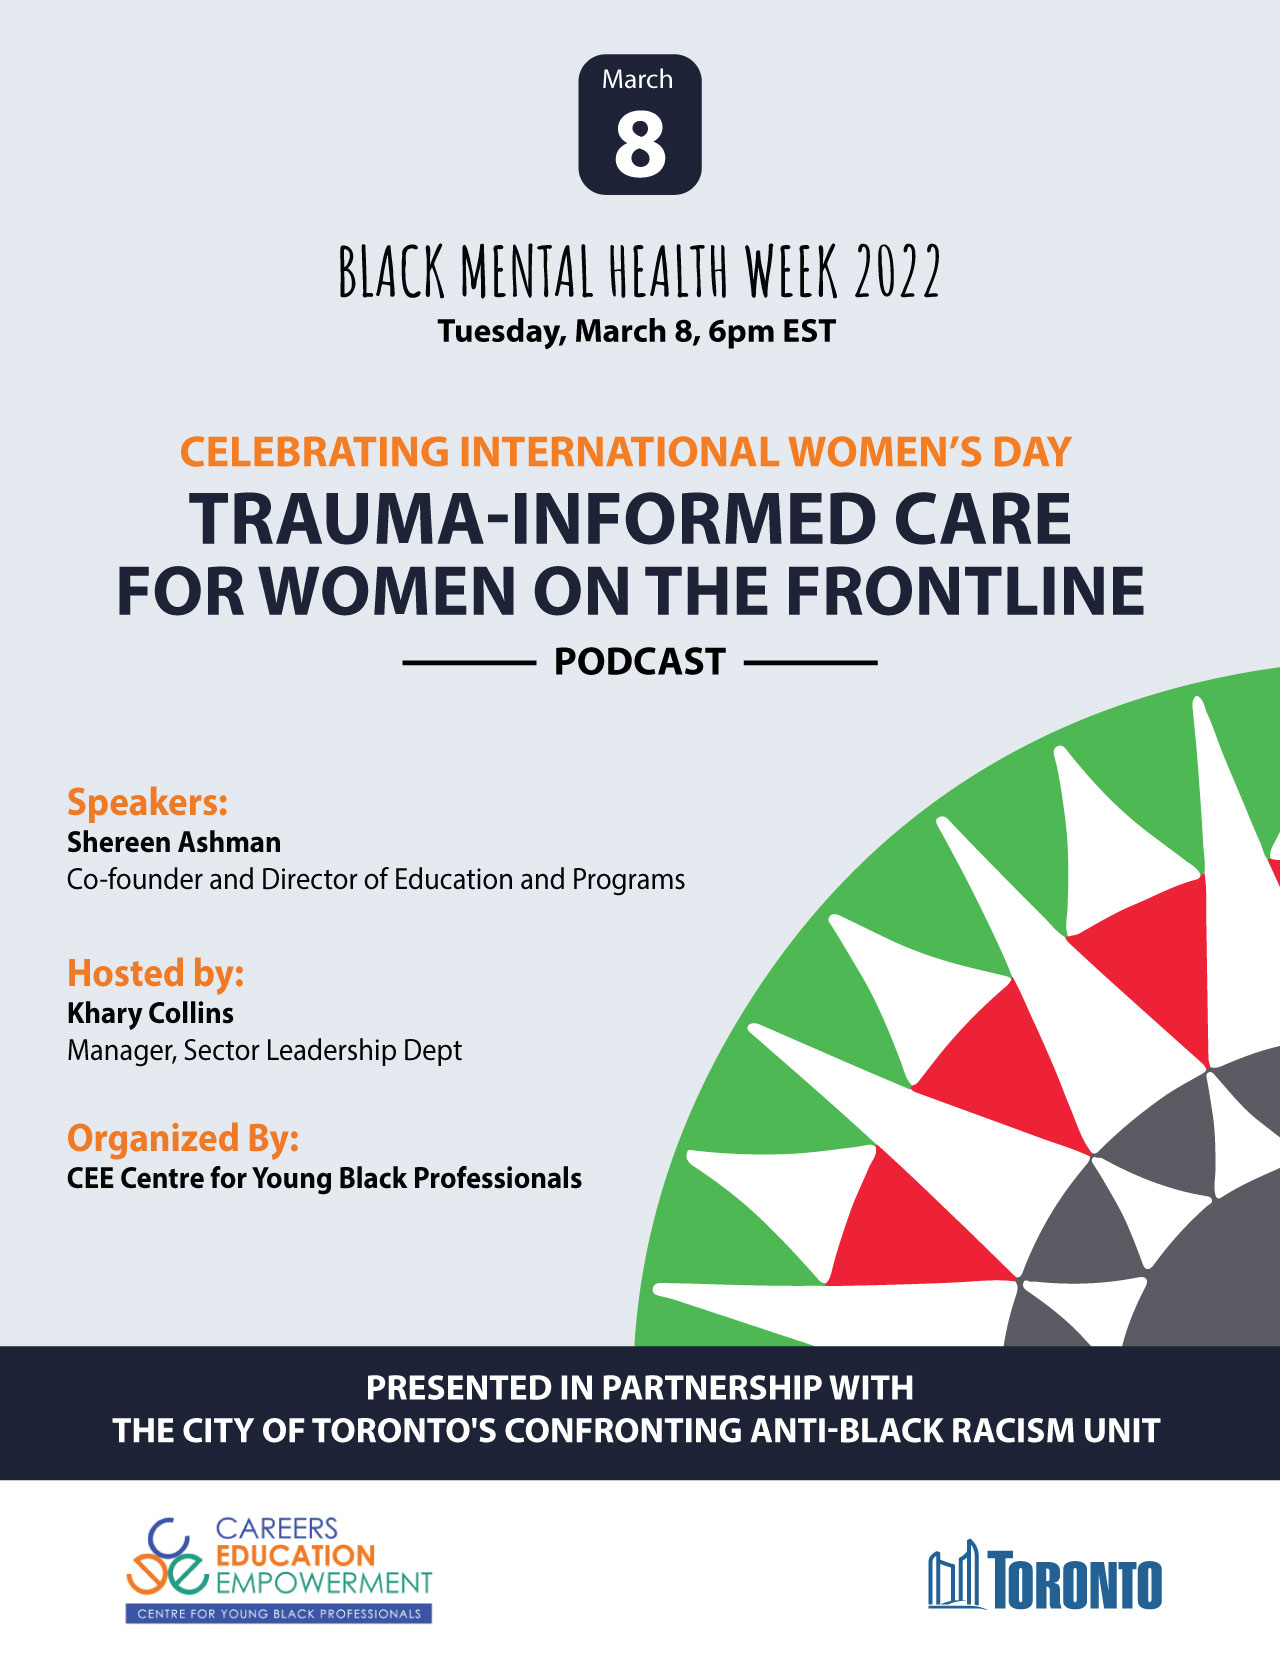 Trauma-informed care for women on the frontline